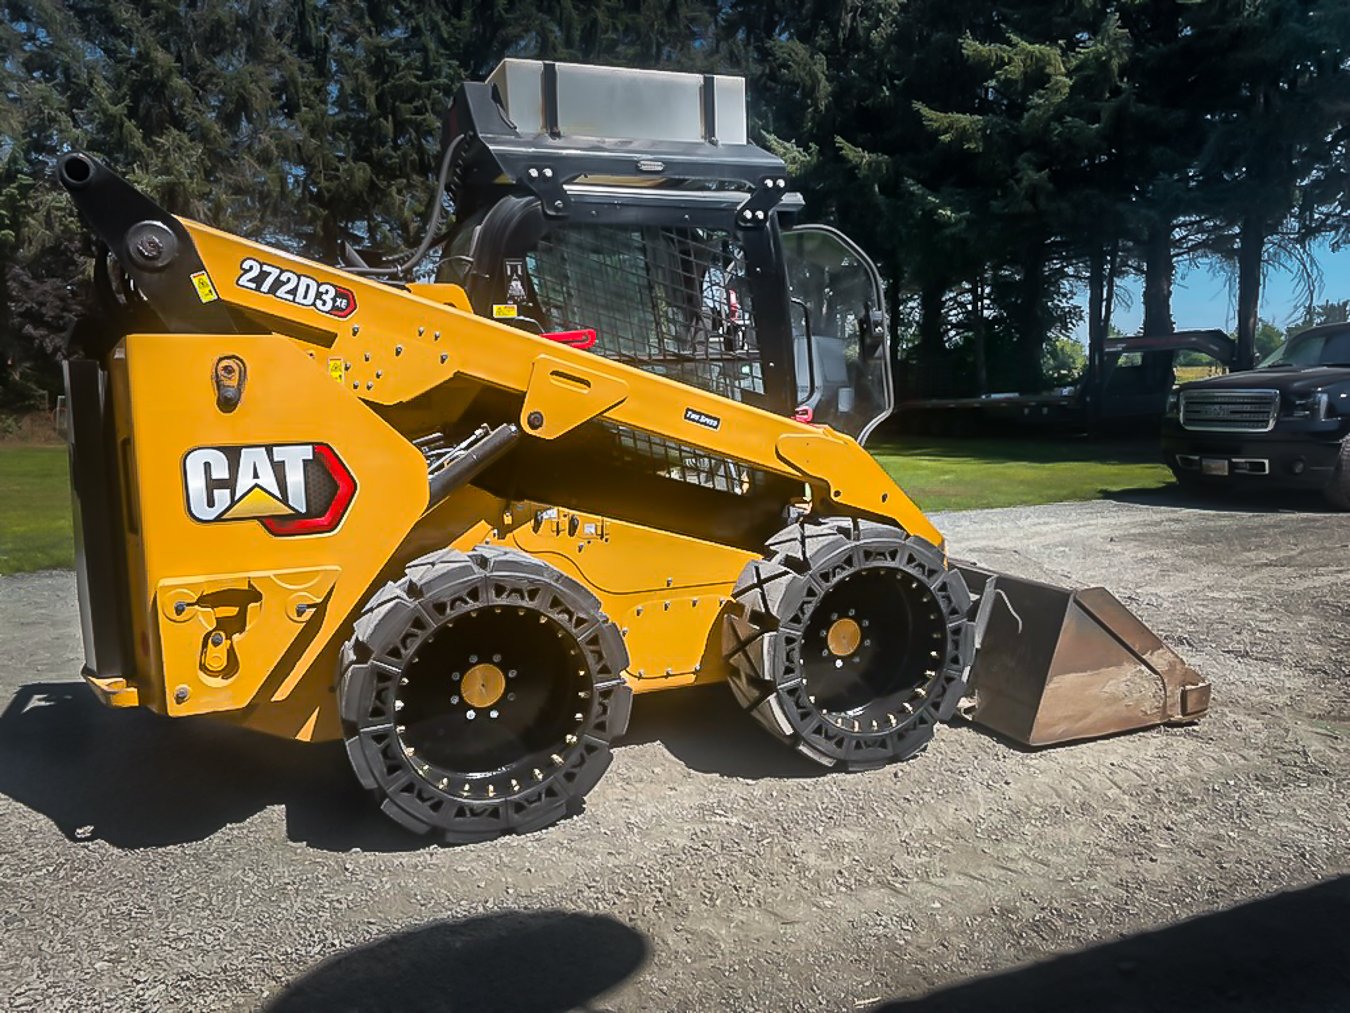 This images shows a CAT 272D3 with our EWRS HS 10x16.5 Solid Skid Steer Tires